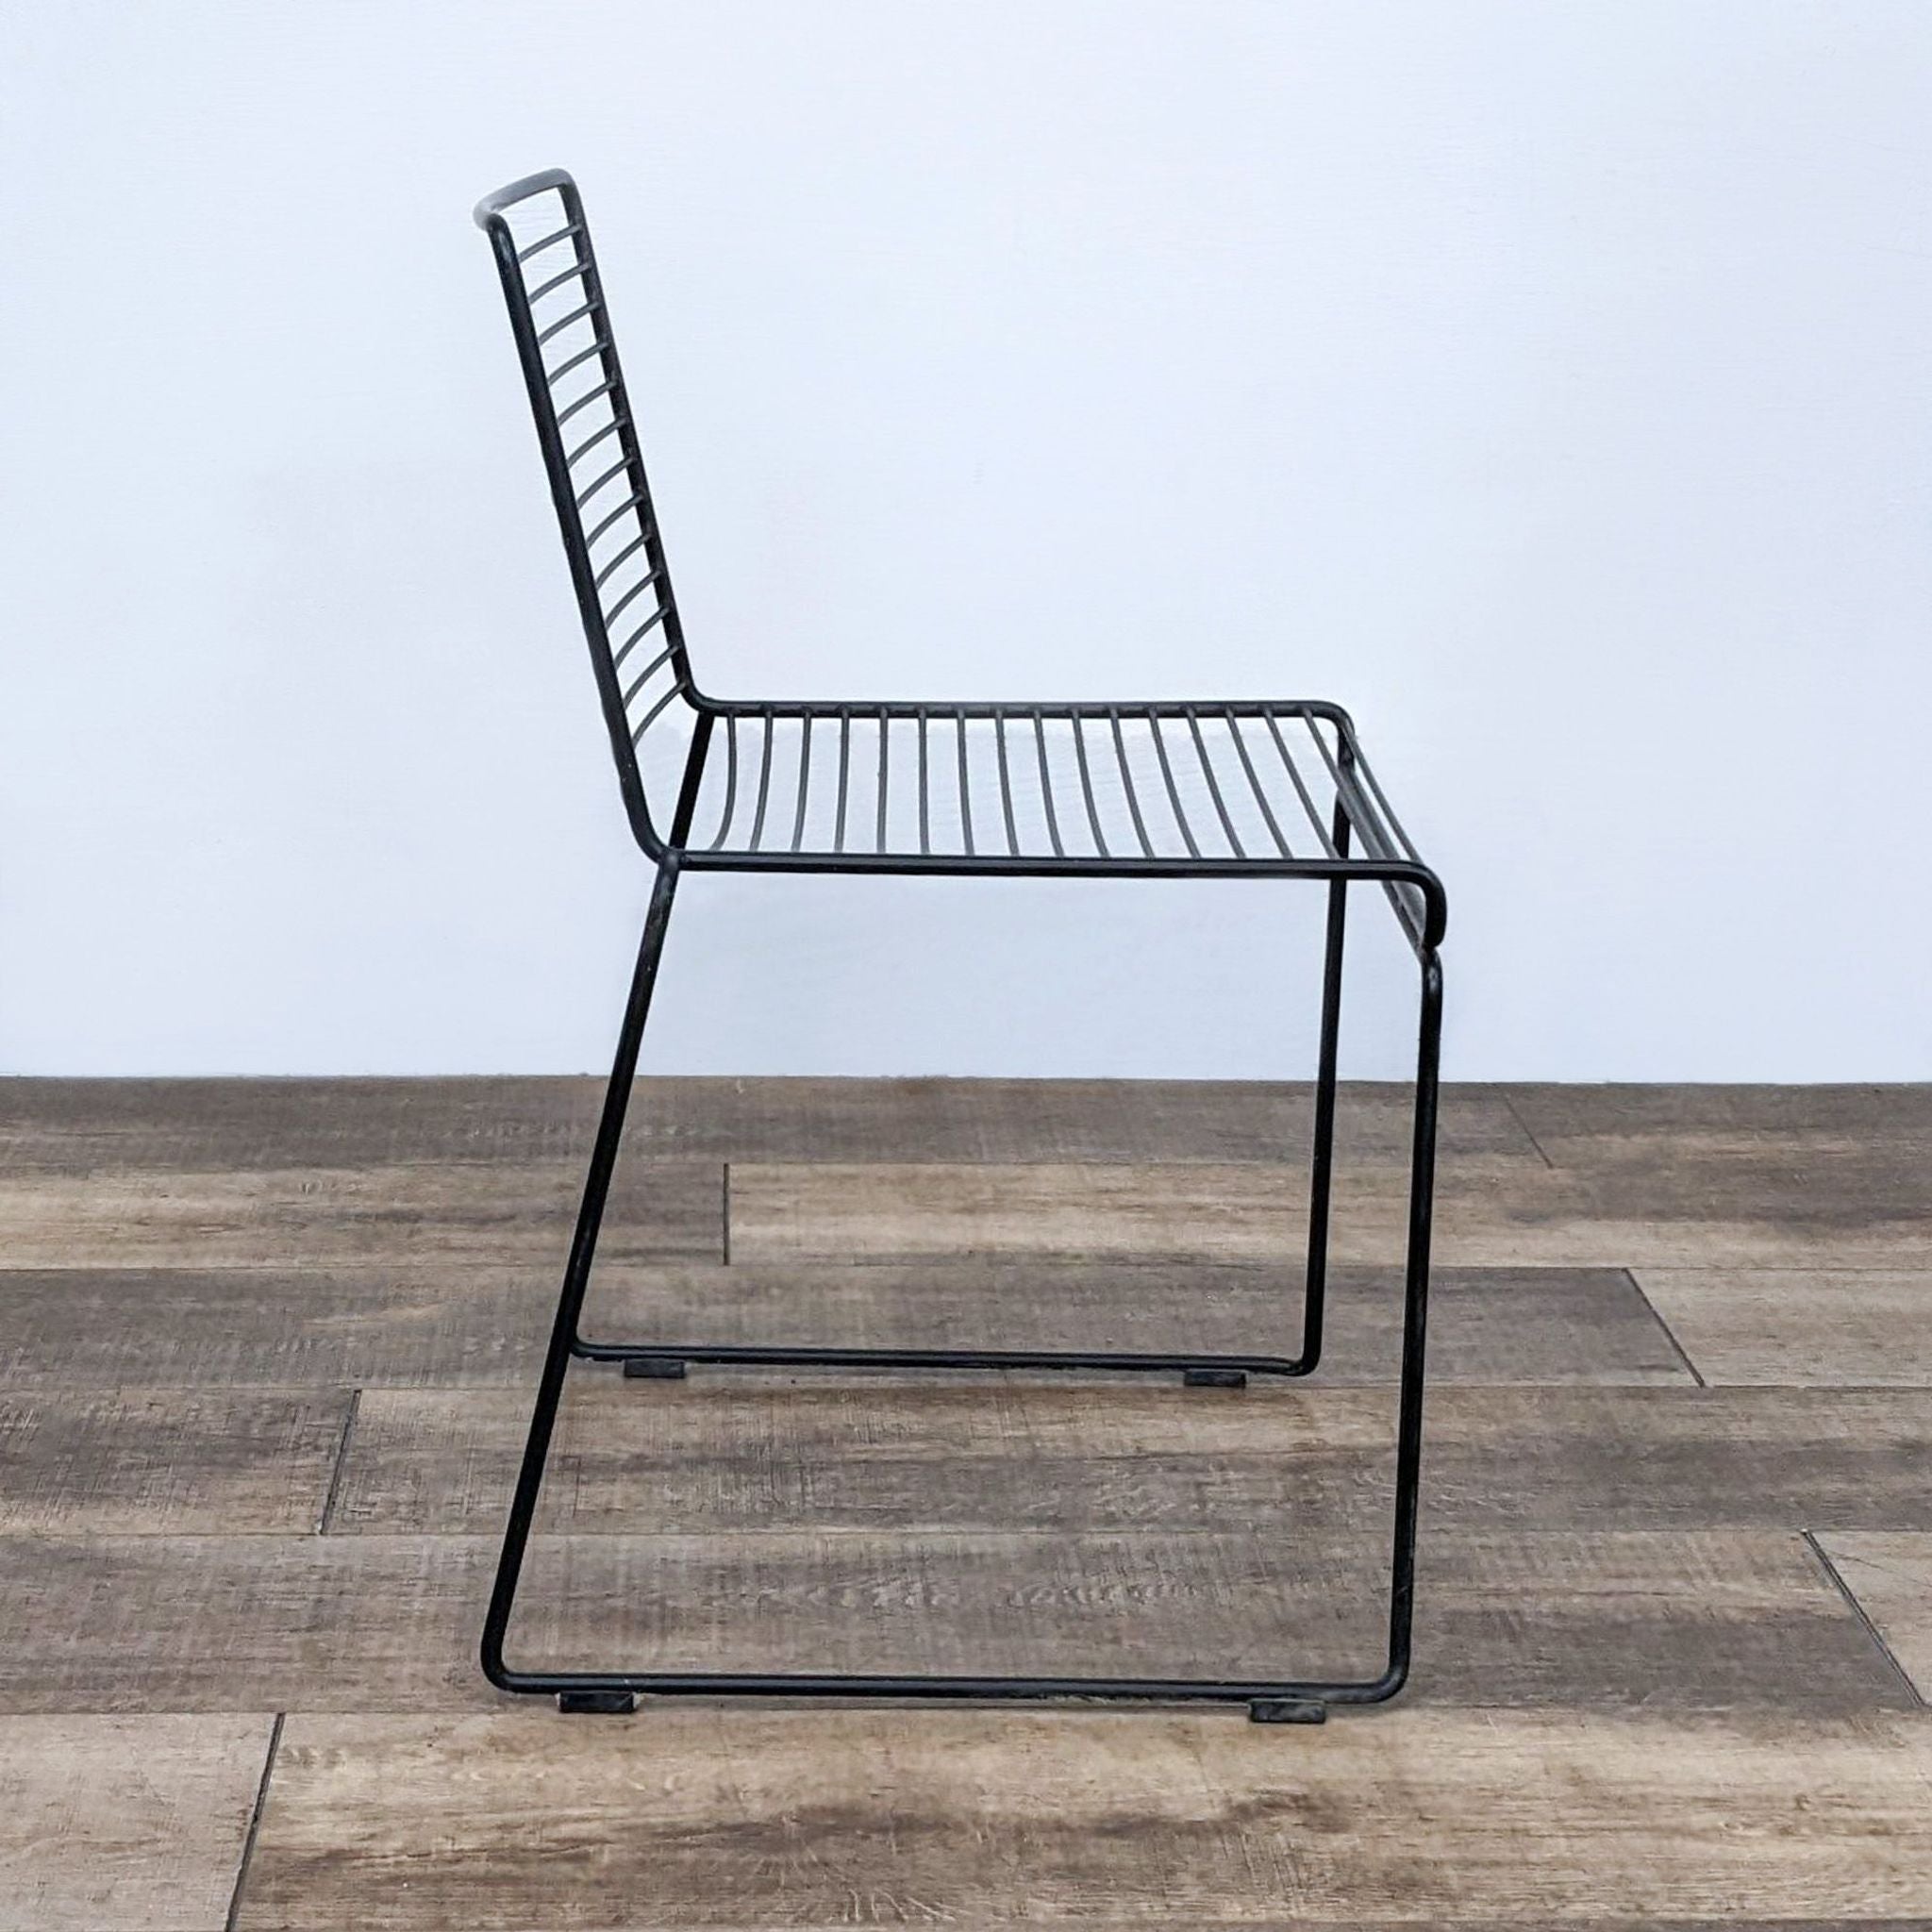 Side angle of the Hee dining chair by Hay revealing its profile, constructed of steel suitable for both indoor and outdoor use.